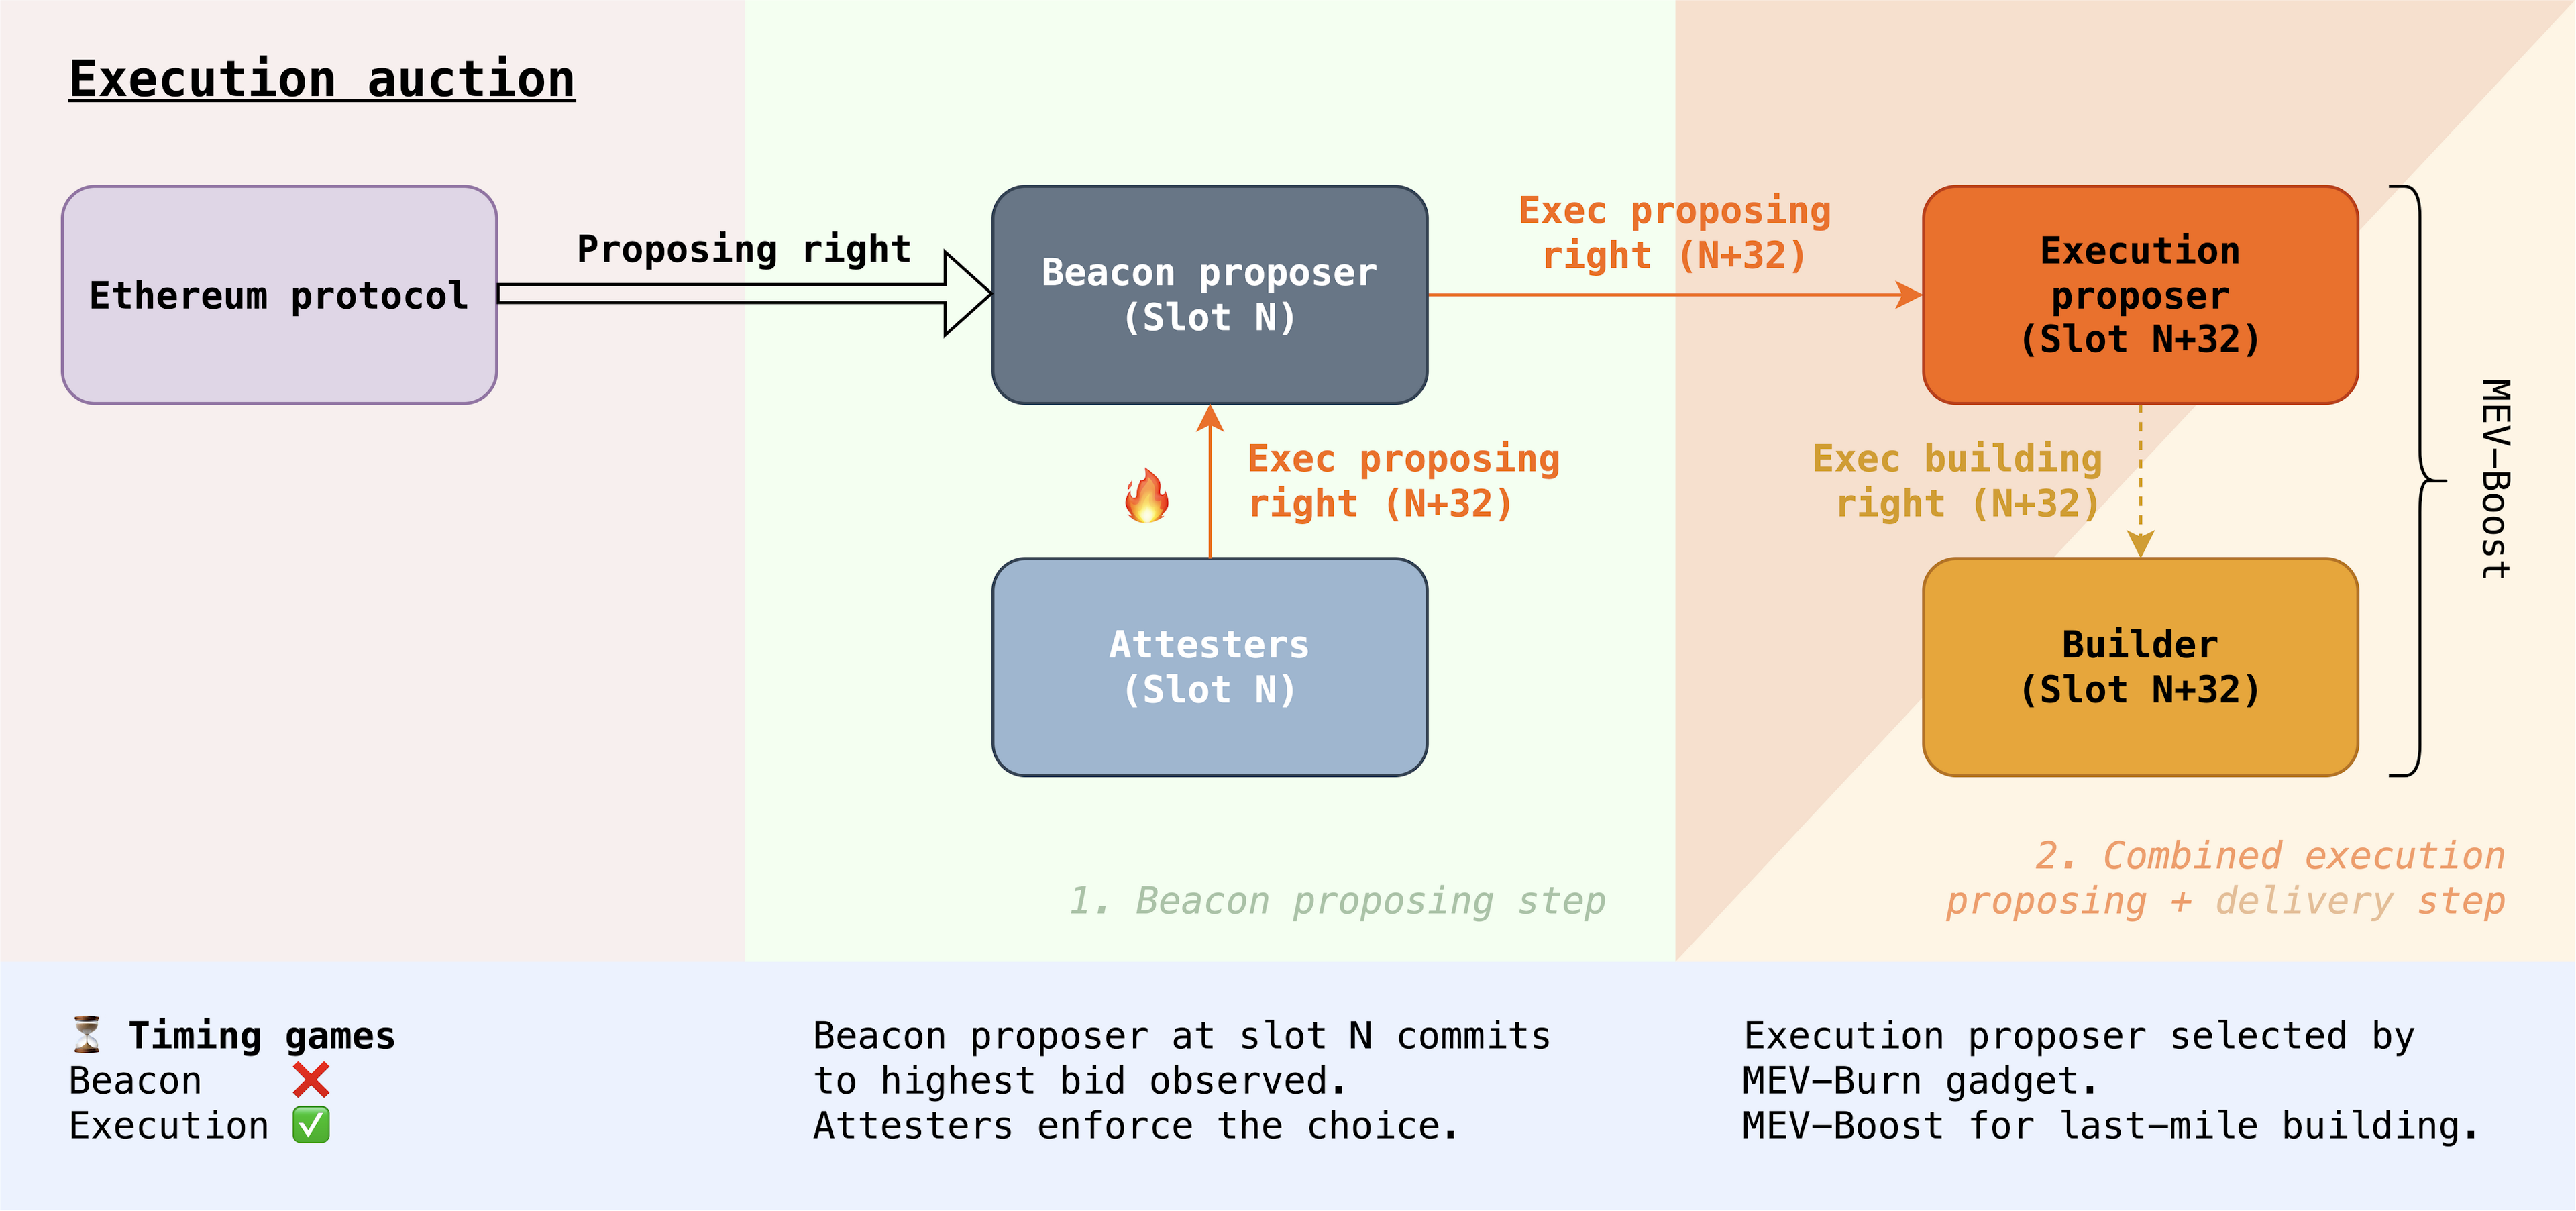 The arrows are now solid lines, as attesters force the beacon proposer to choose a specific bid. The execution proposer however retains agency to allocate their building rights to a builder.